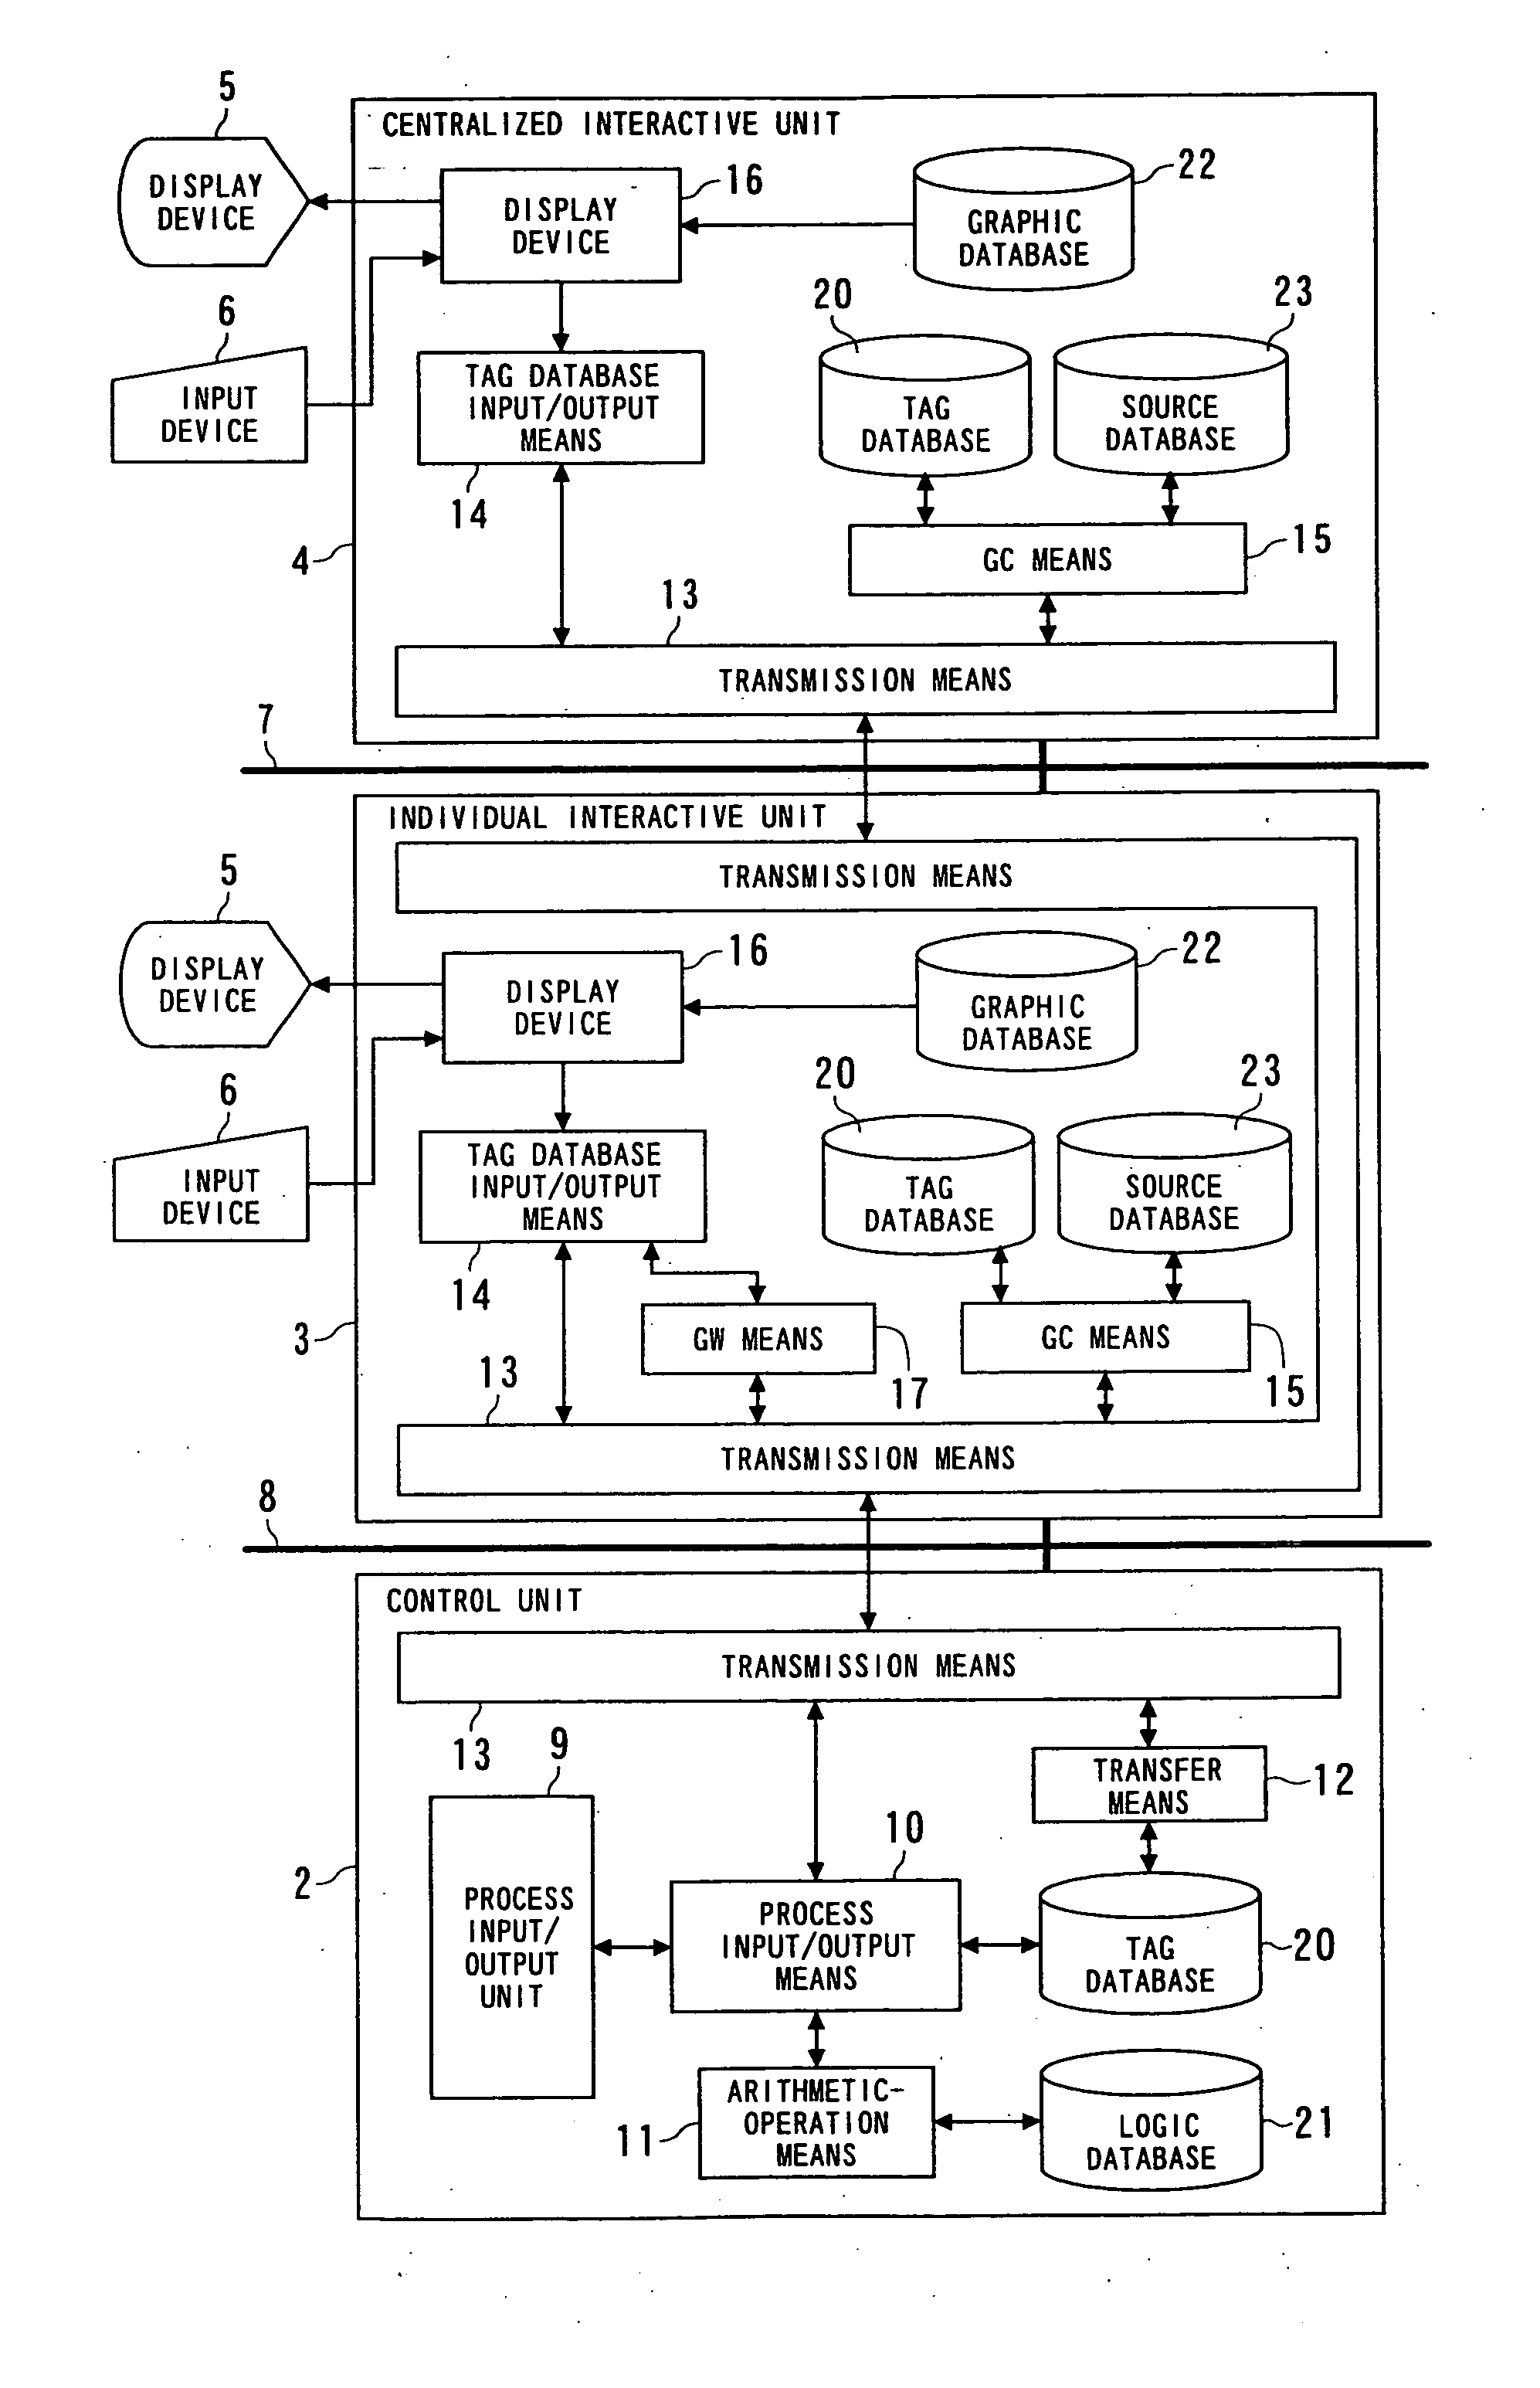 Centralized plant-monitoring controller and method